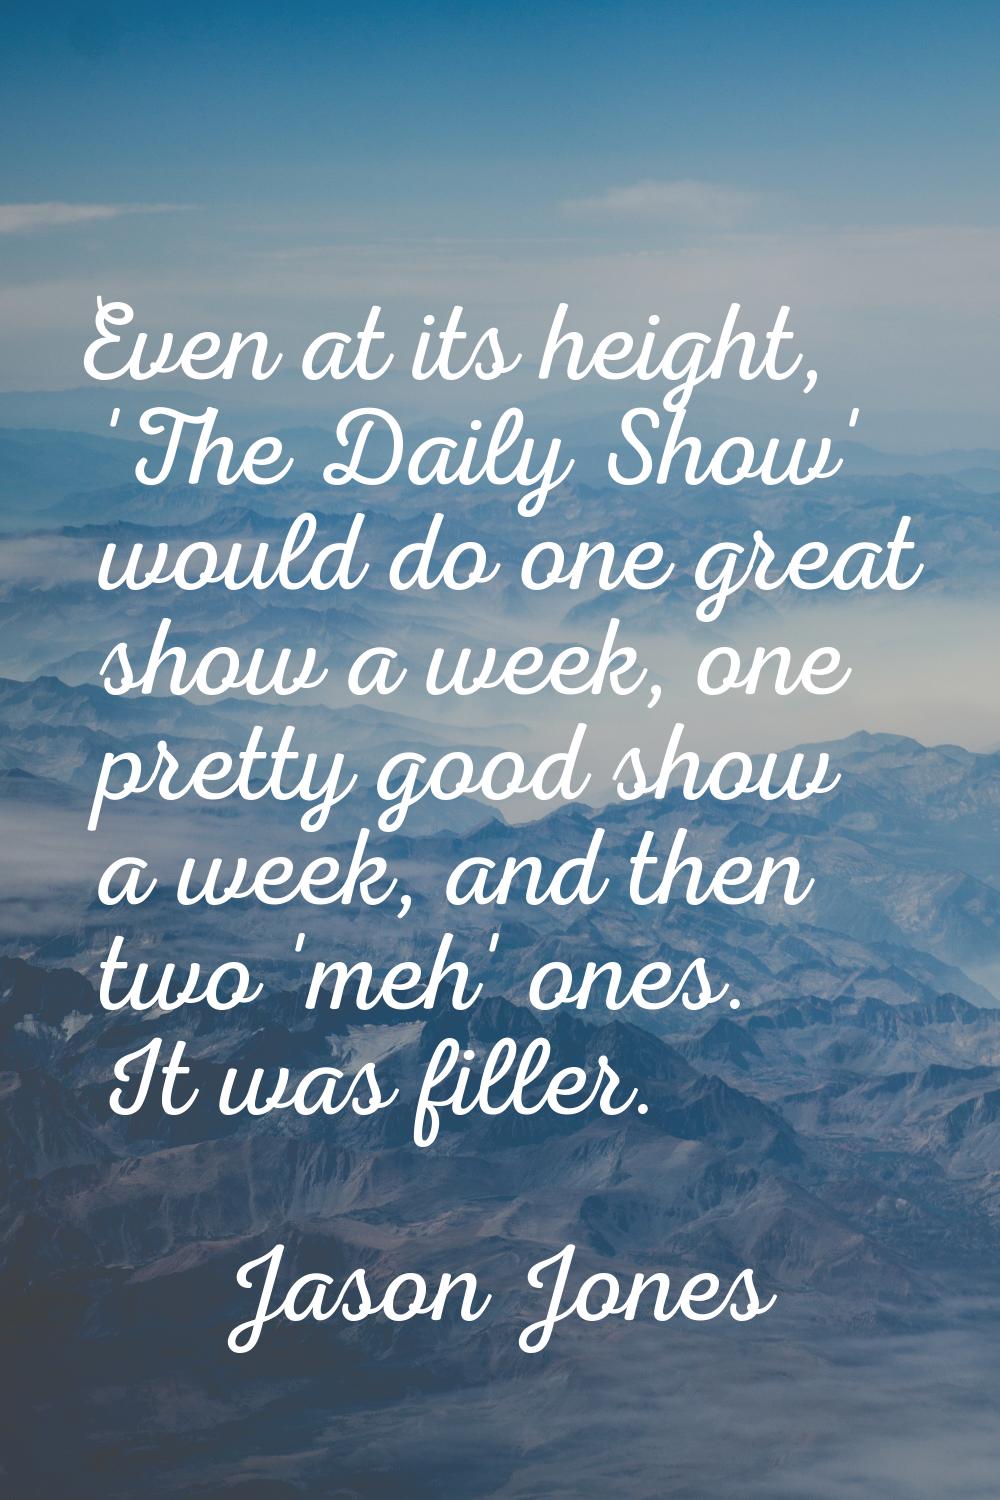 Even at its height, 'The Daily Show' would do one great show a week, one pretty good show a week, a